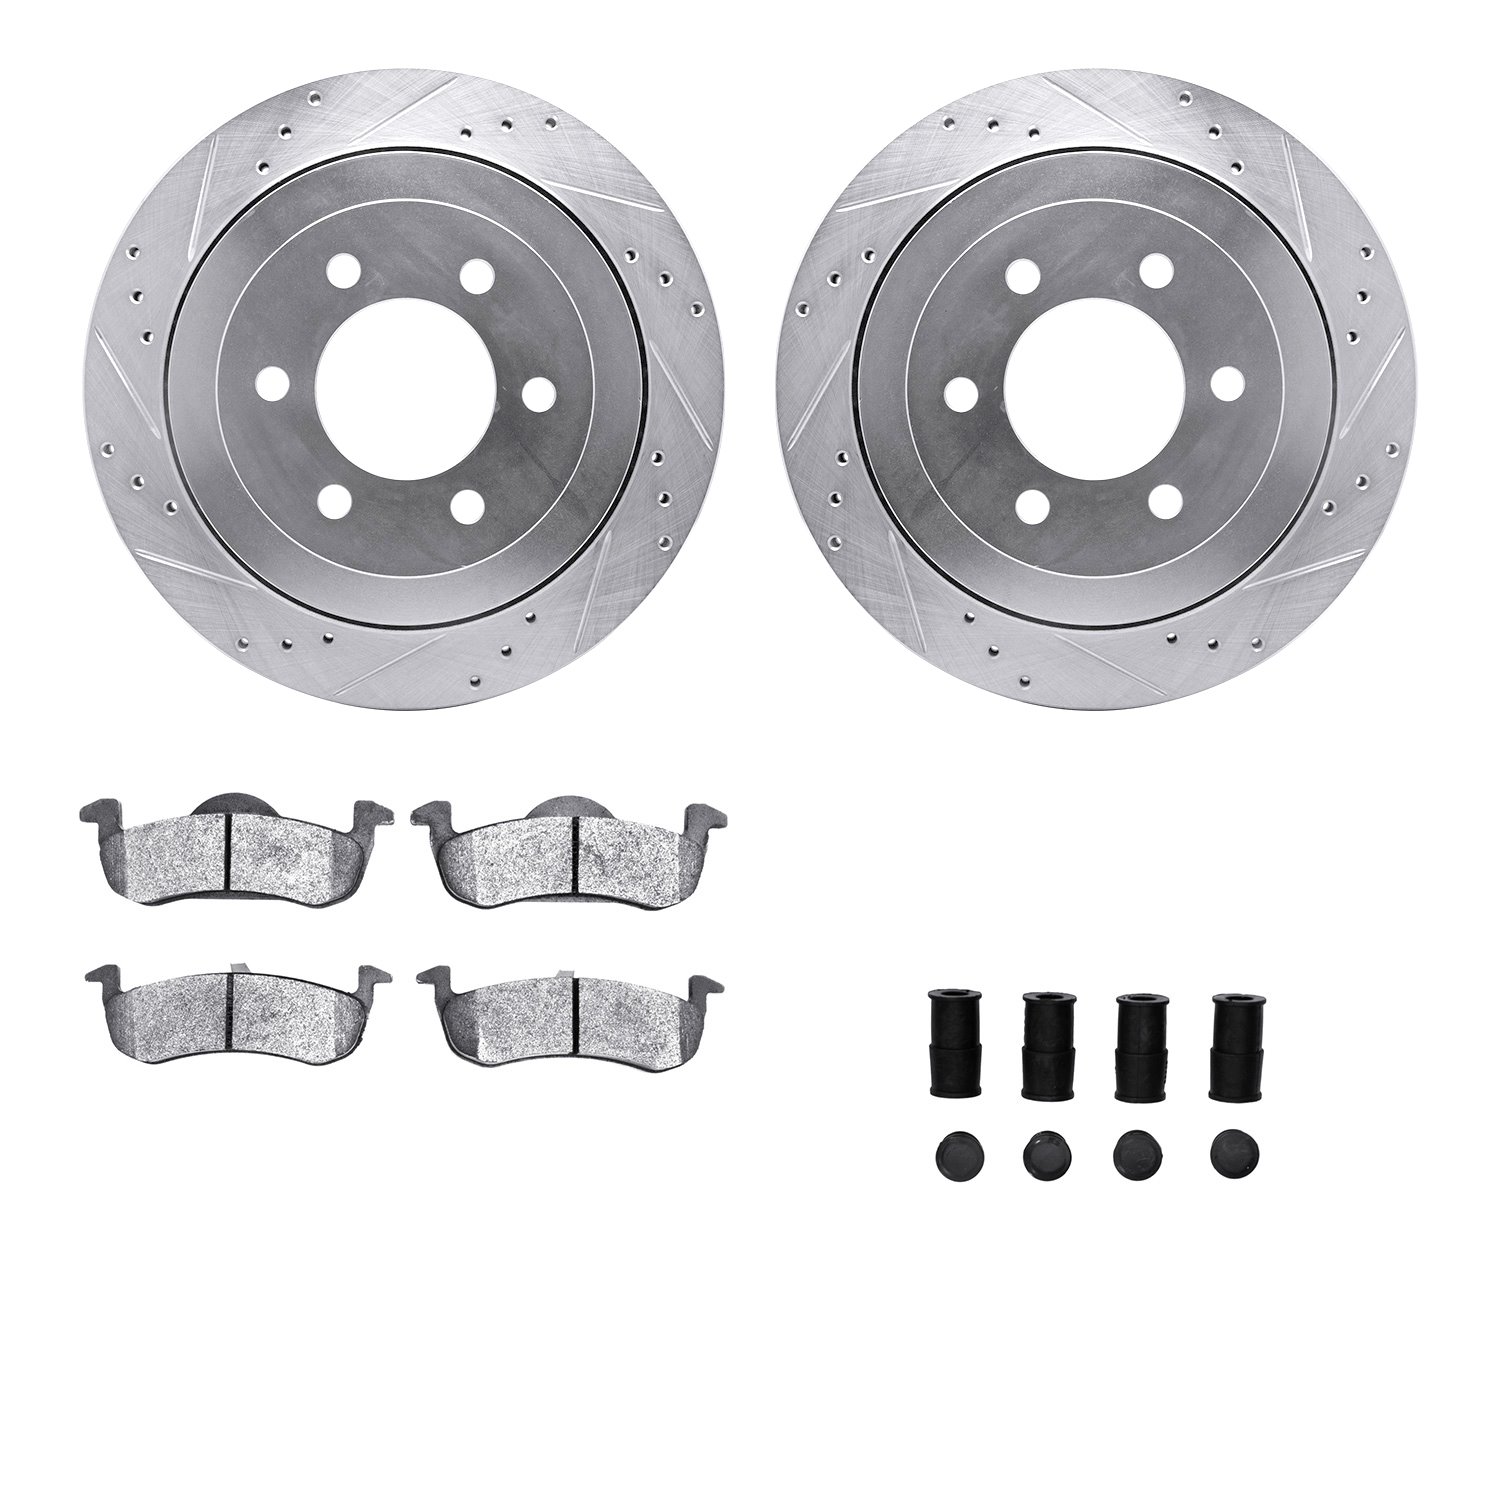 7212-99214 Drilled/Slotted Rotors w/Heavy-Duty Brake Pads Kit & Hardware [Silver], 2007-2017 Ford/Lincoln/Mercury/Mazda, Positio